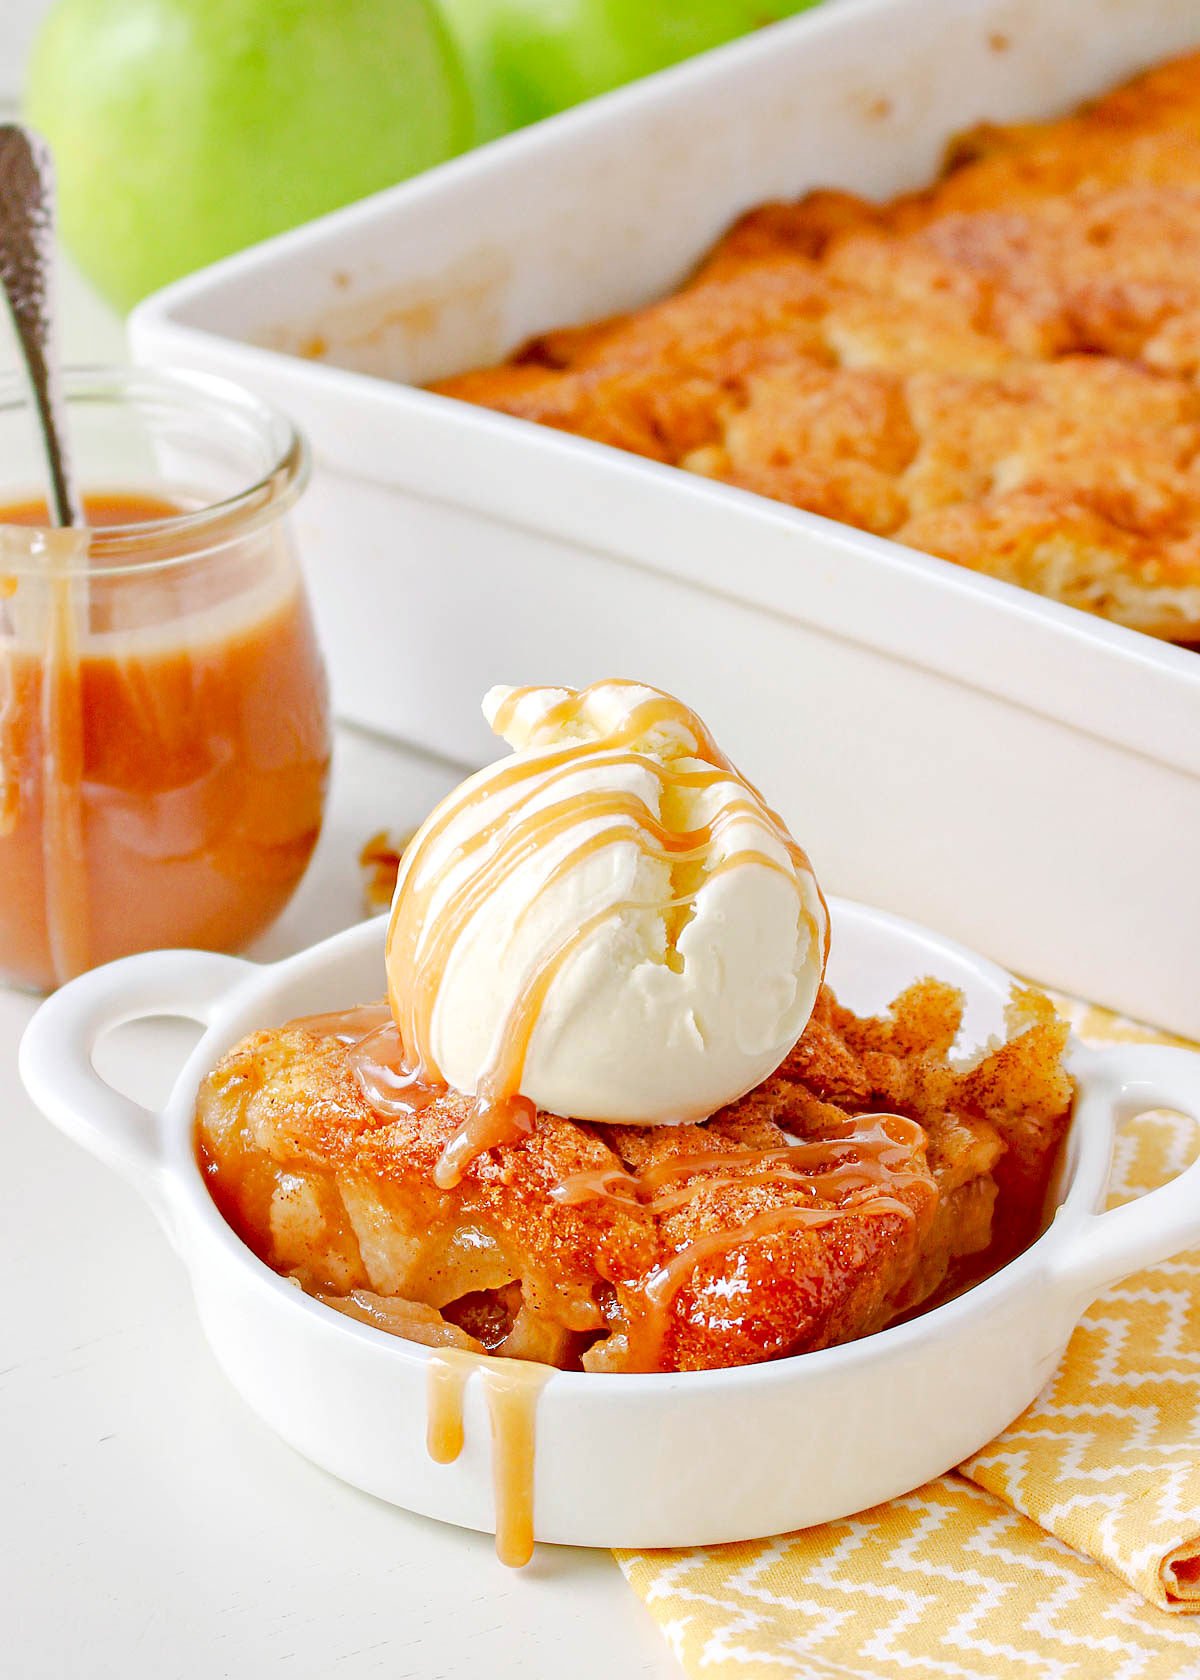 apple cobbler made with caramel sauce in small white dish topped with ice cream and salted caramel.